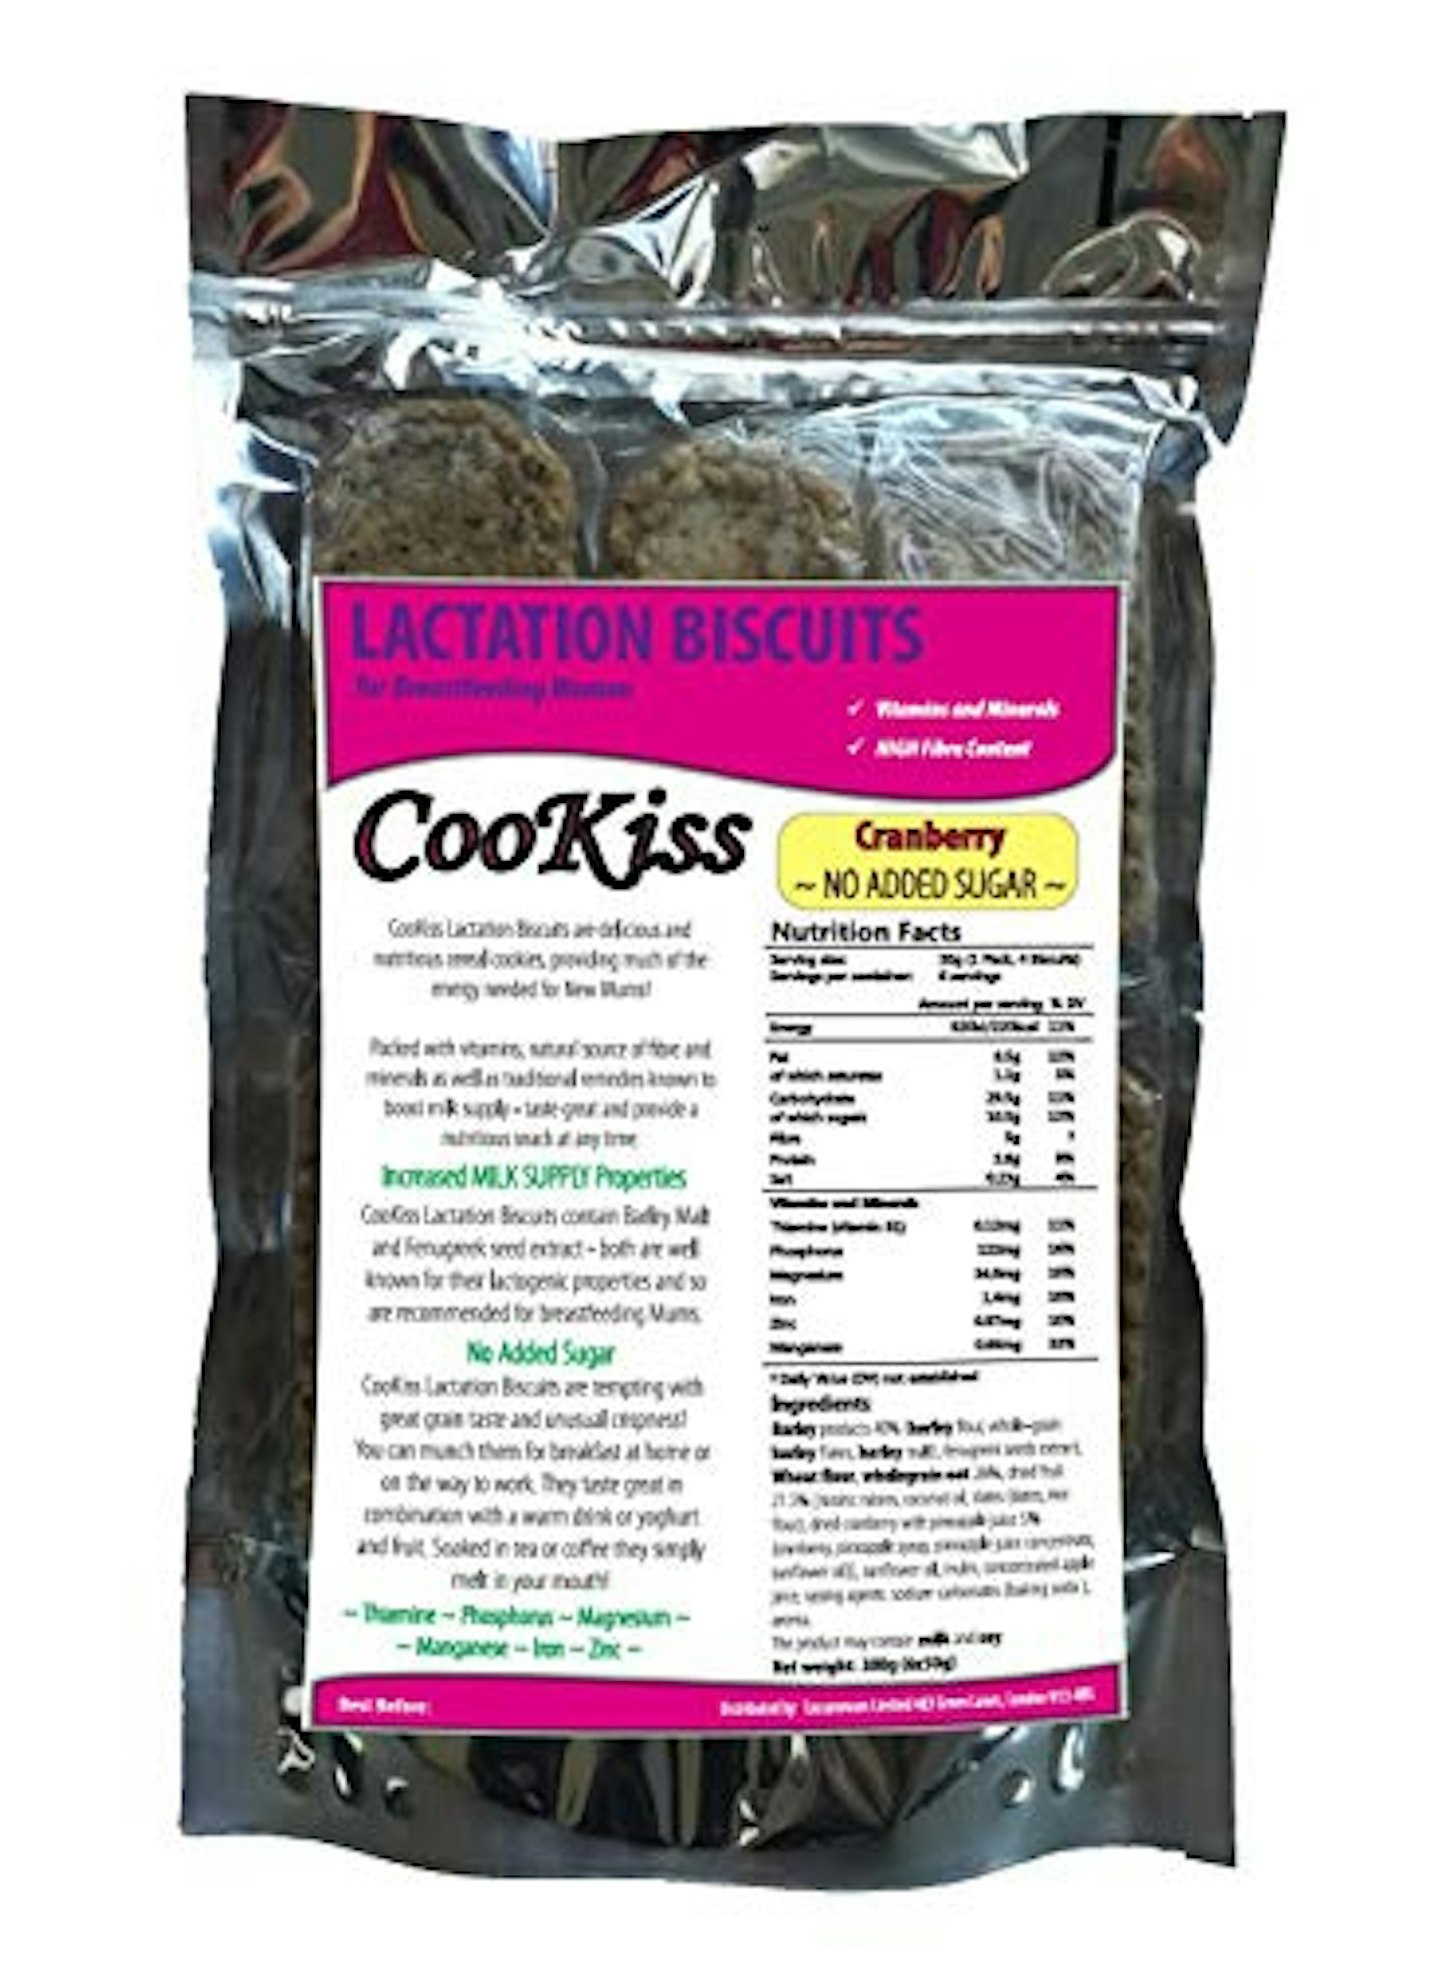 CooKiss Lactation Biscuits